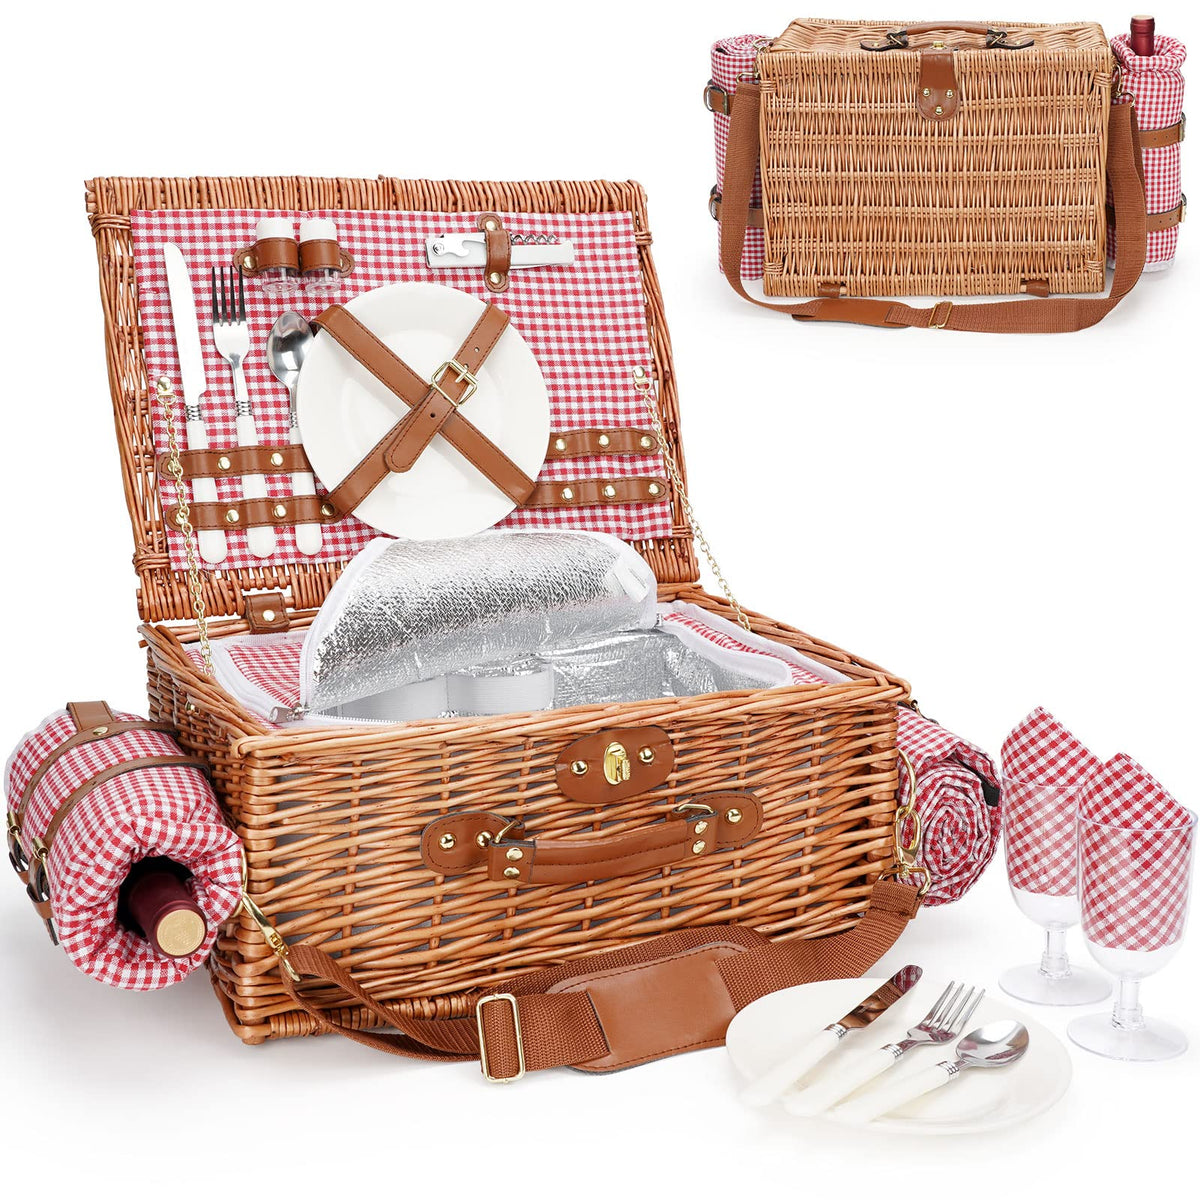 Adorable & Exquisite Picnic Basket for 2 Persons